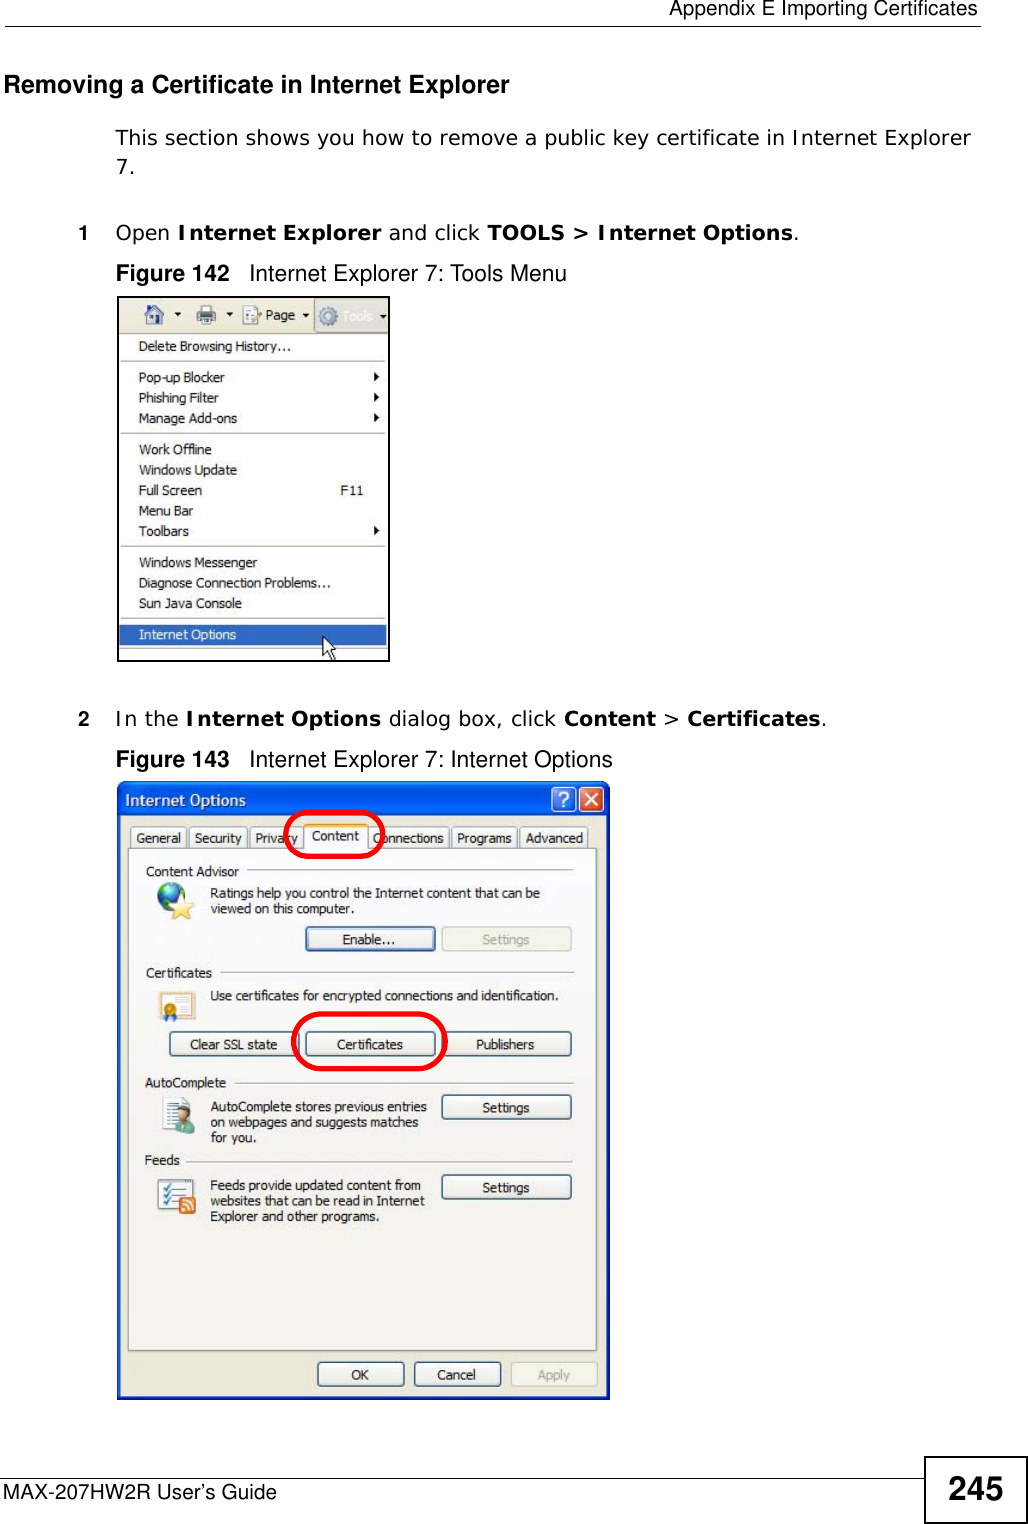  Appendix E Importing CertificatesMAX-207HW2R User’s Guide 245Removing a Certificate in Internet ExplorerThis section shows you how to remove a public key certificate in Internet Explorer 7.1Open Internet Explorer and click TOOLS &gt; Internet Options.Figure 142   Internet Explorer 7: Tools Menu2In the Internet Options dialog box, click Content &gt; Certificates.Figure 143   Internet Explorer 7: Internet Options